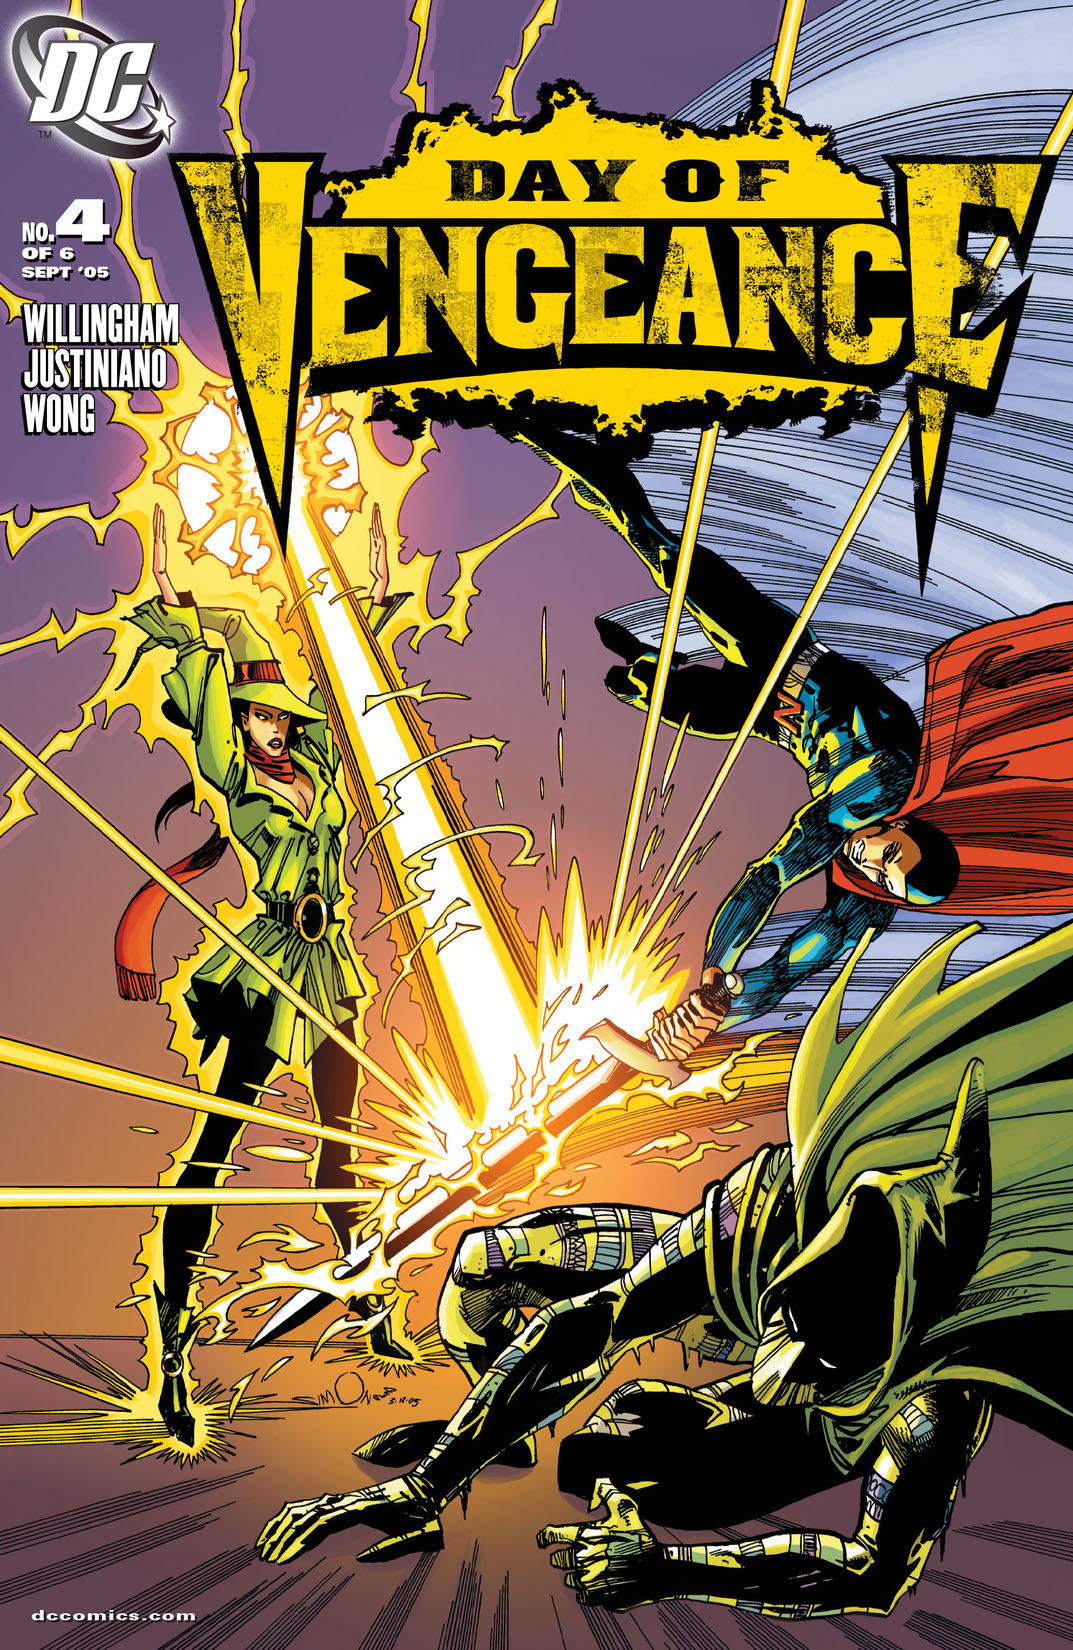 Day of Vengeance #4 preview images